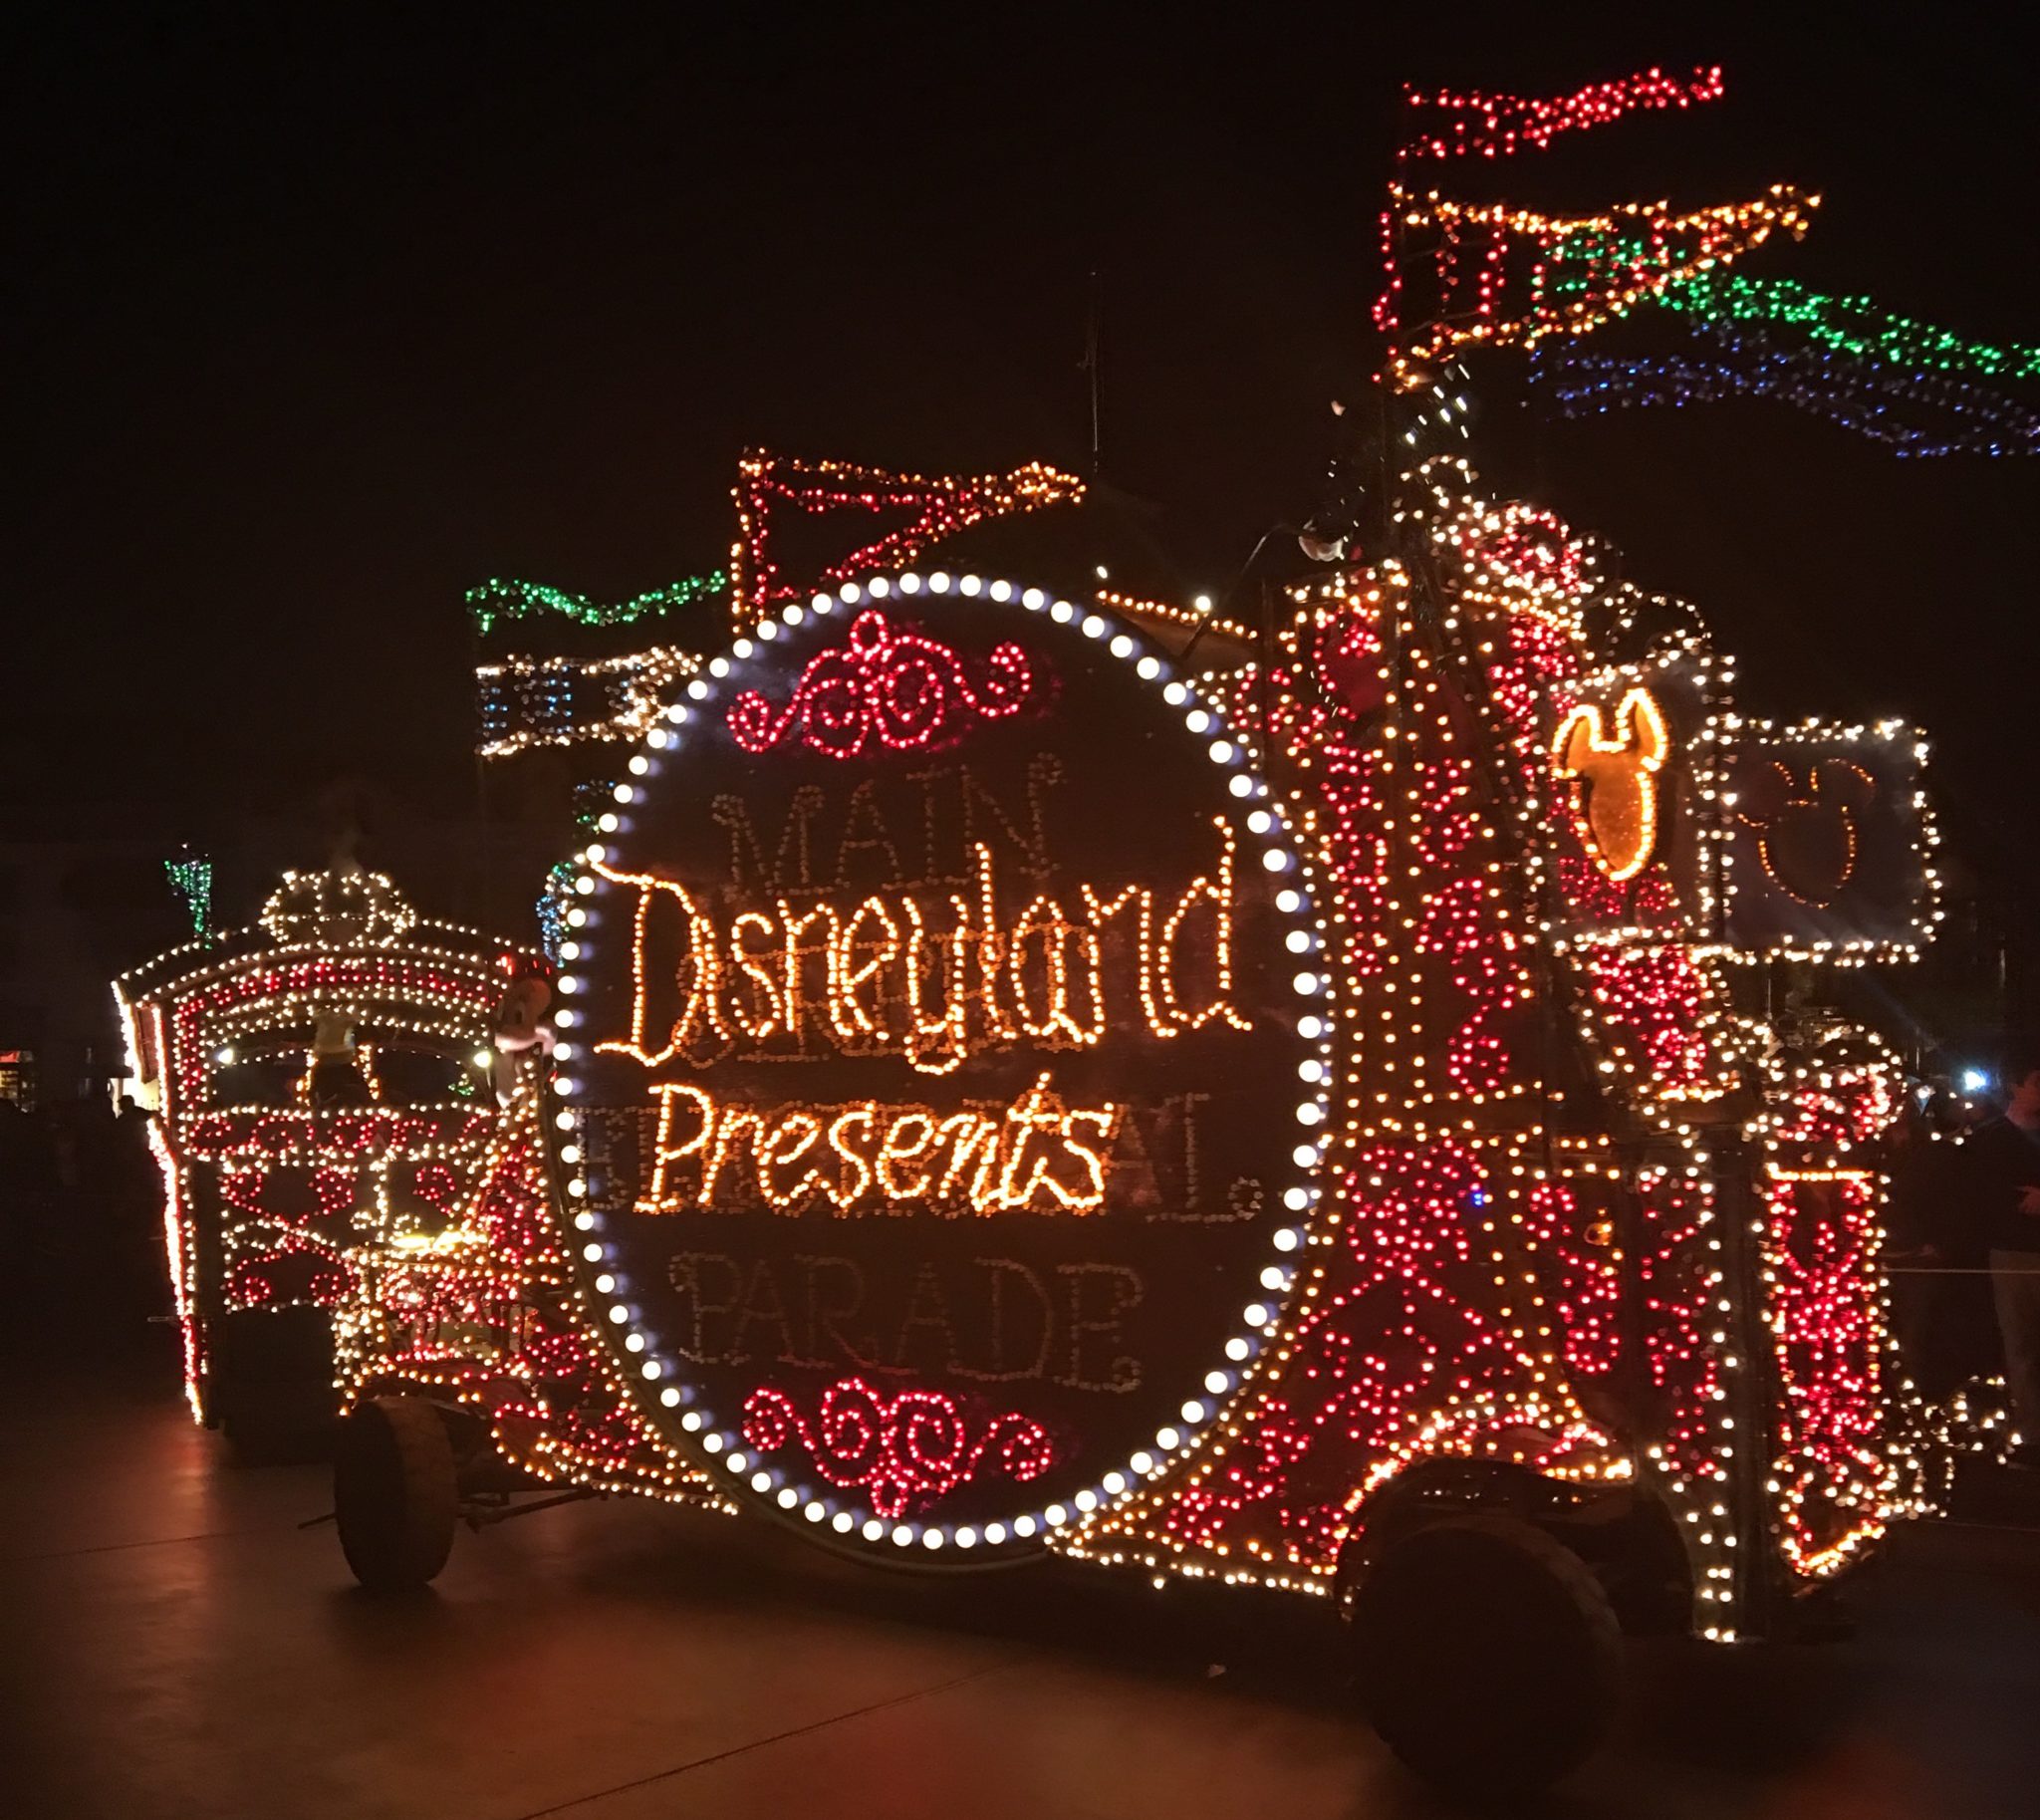 Watch a Live Stream of Main Street Electrical Parade at Disneyland Park on March 7